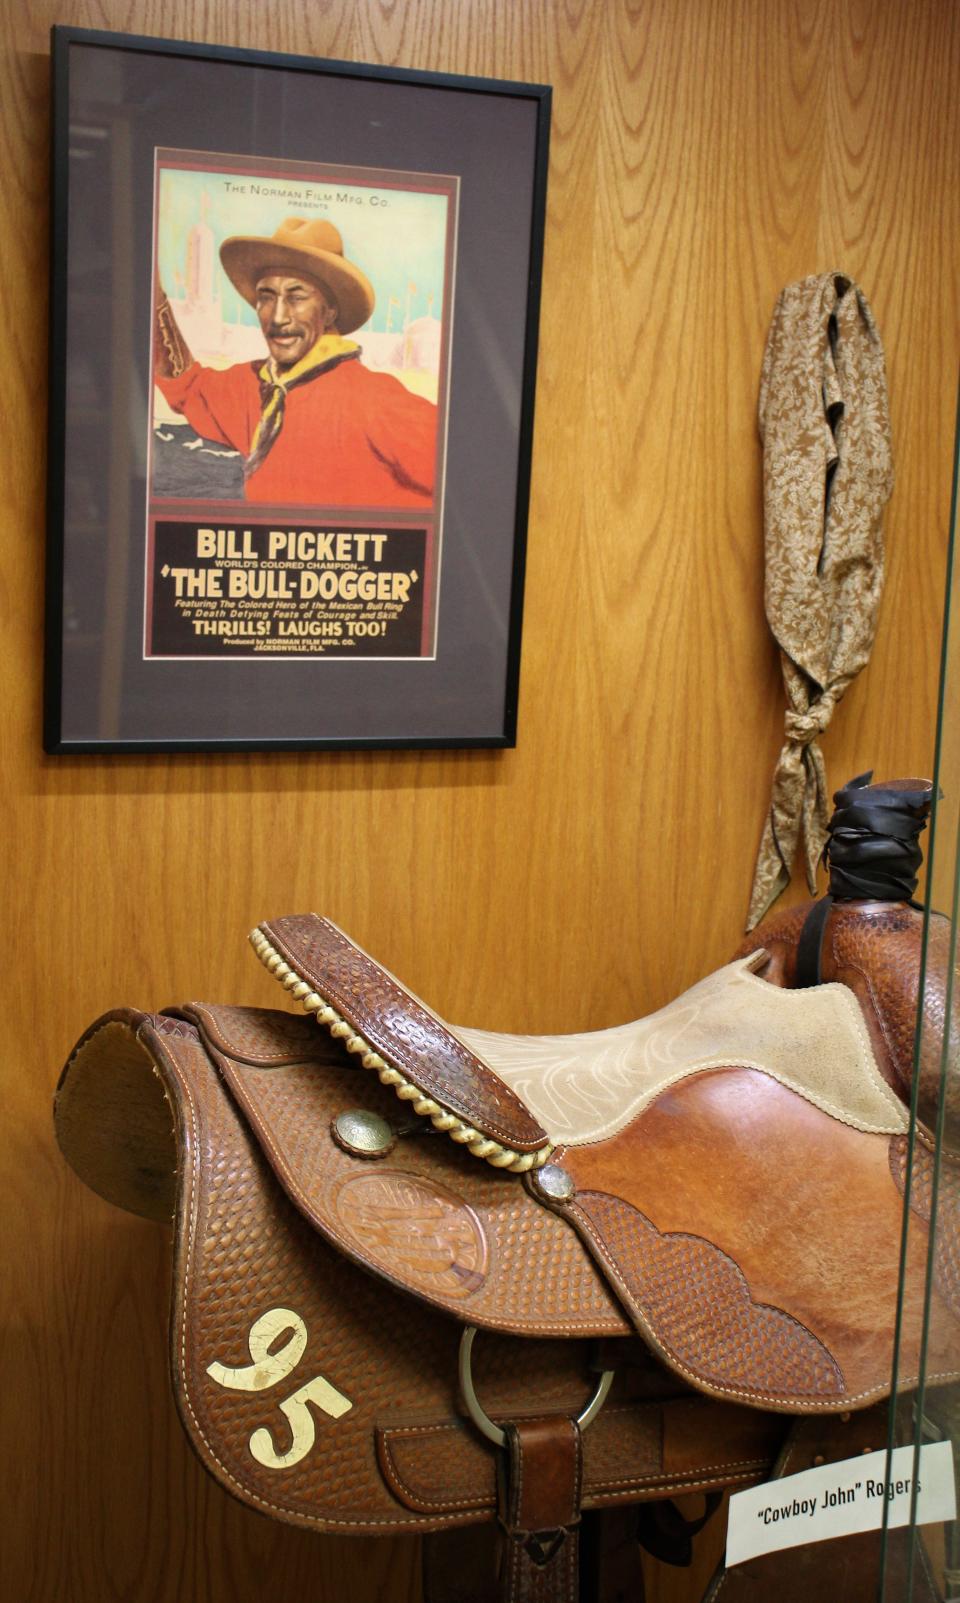 A saddle belonging to "Cowboy John" Rogers, father of Shawnte Fleming.